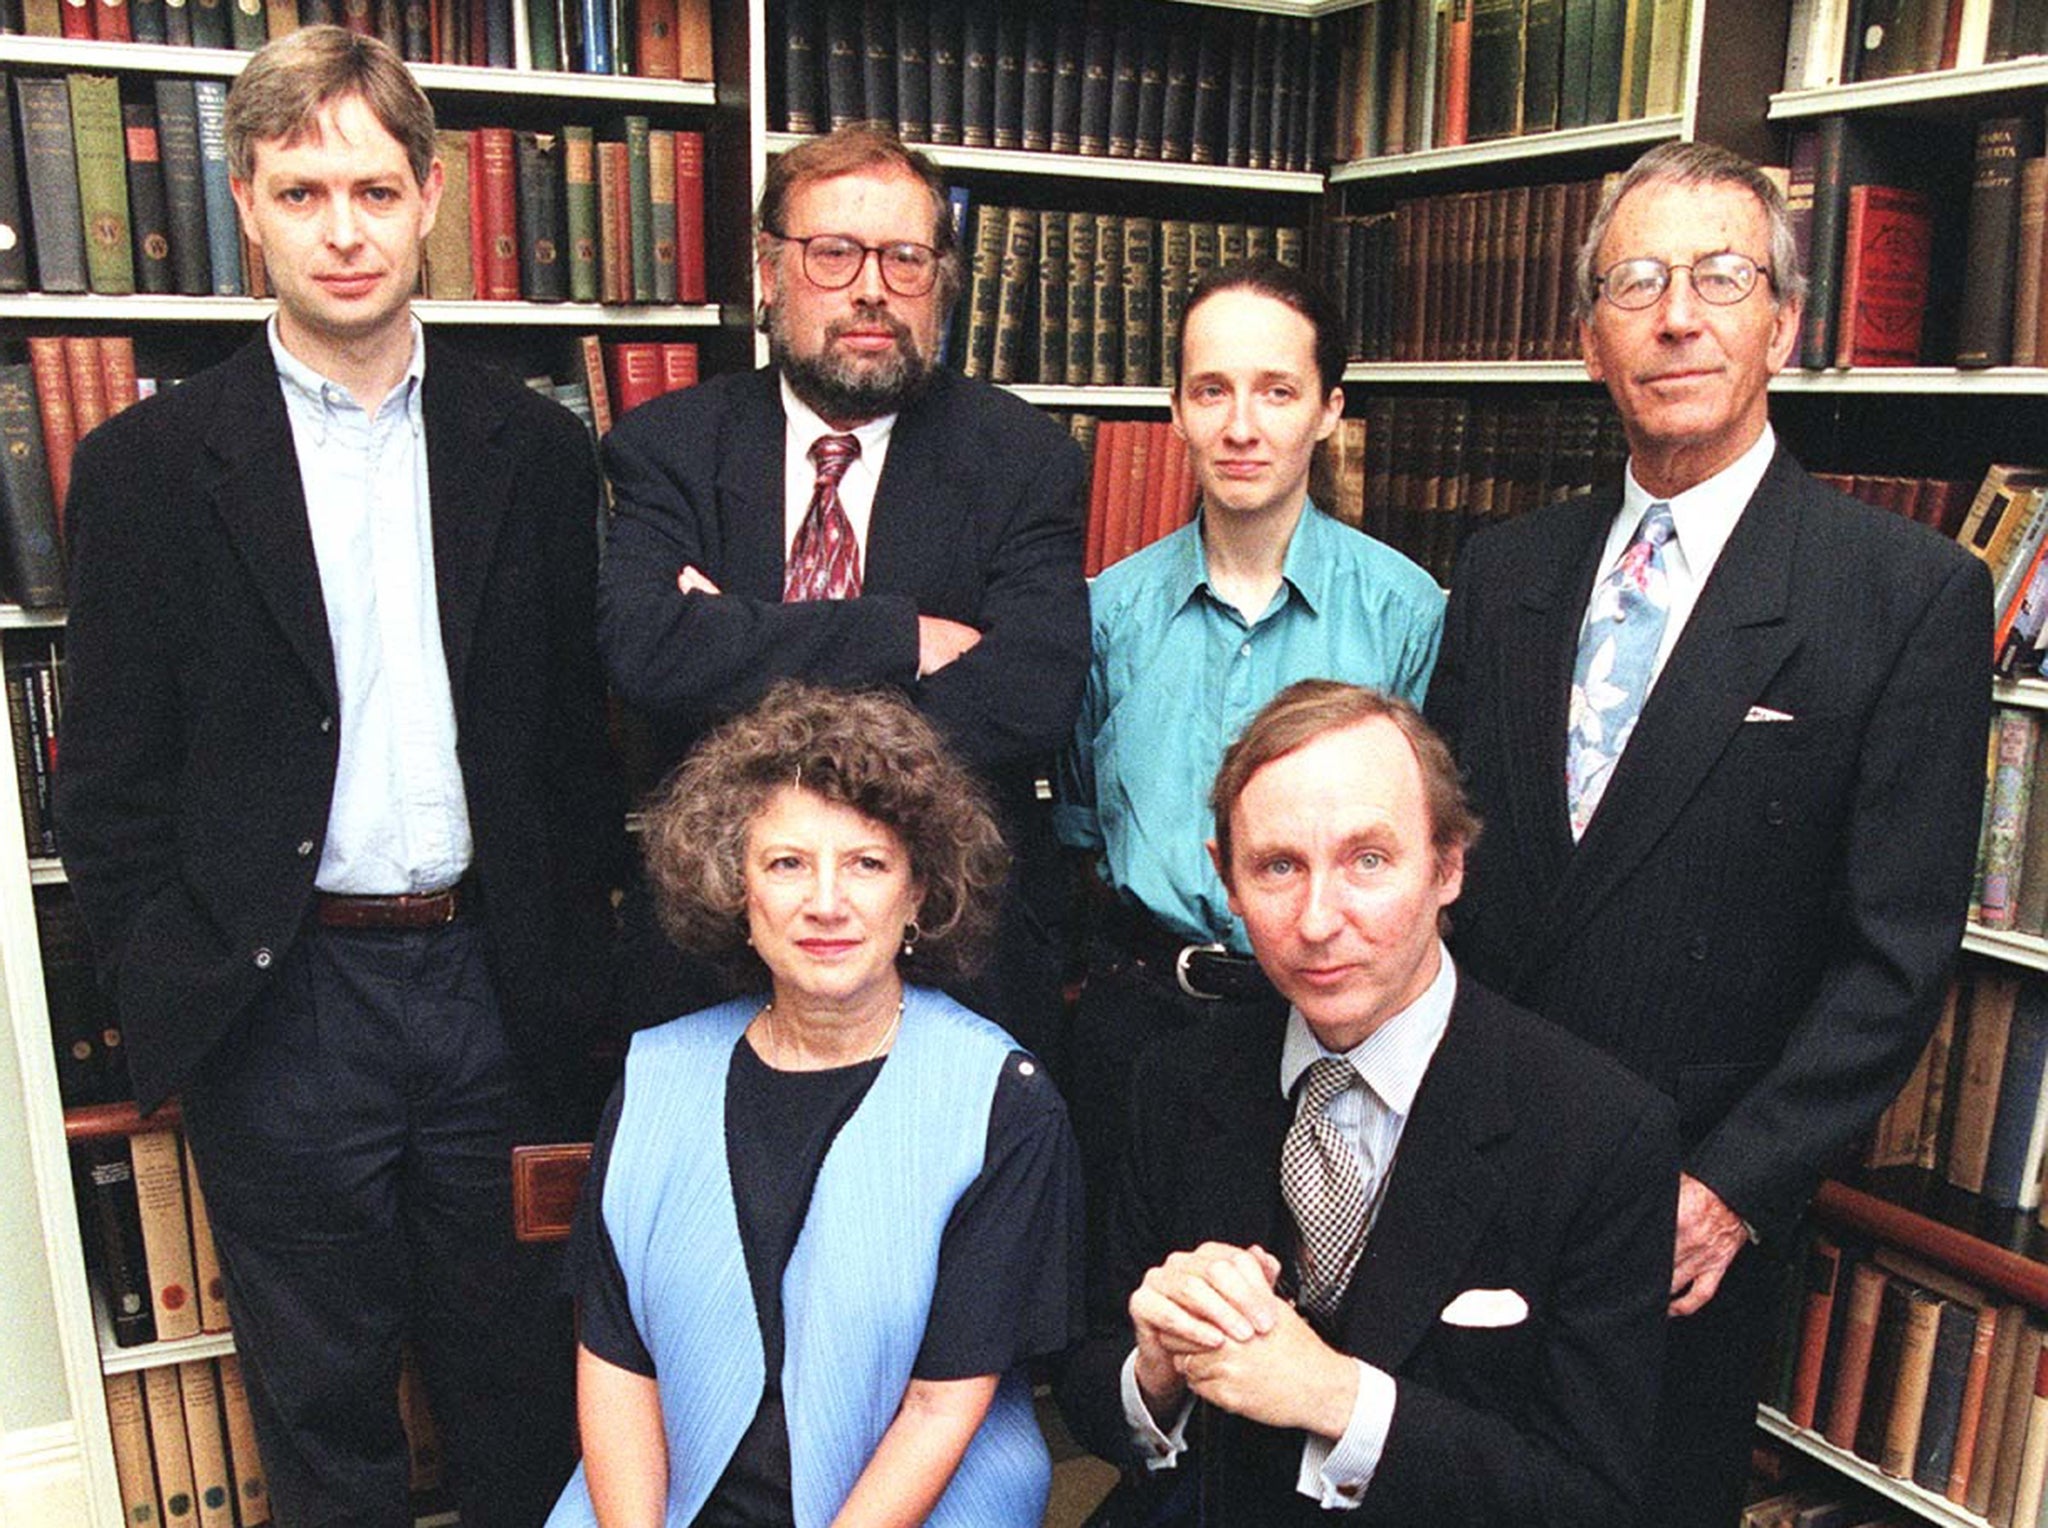 Ian Jack, back row second left, was on the Booker prize judging panel in 1996